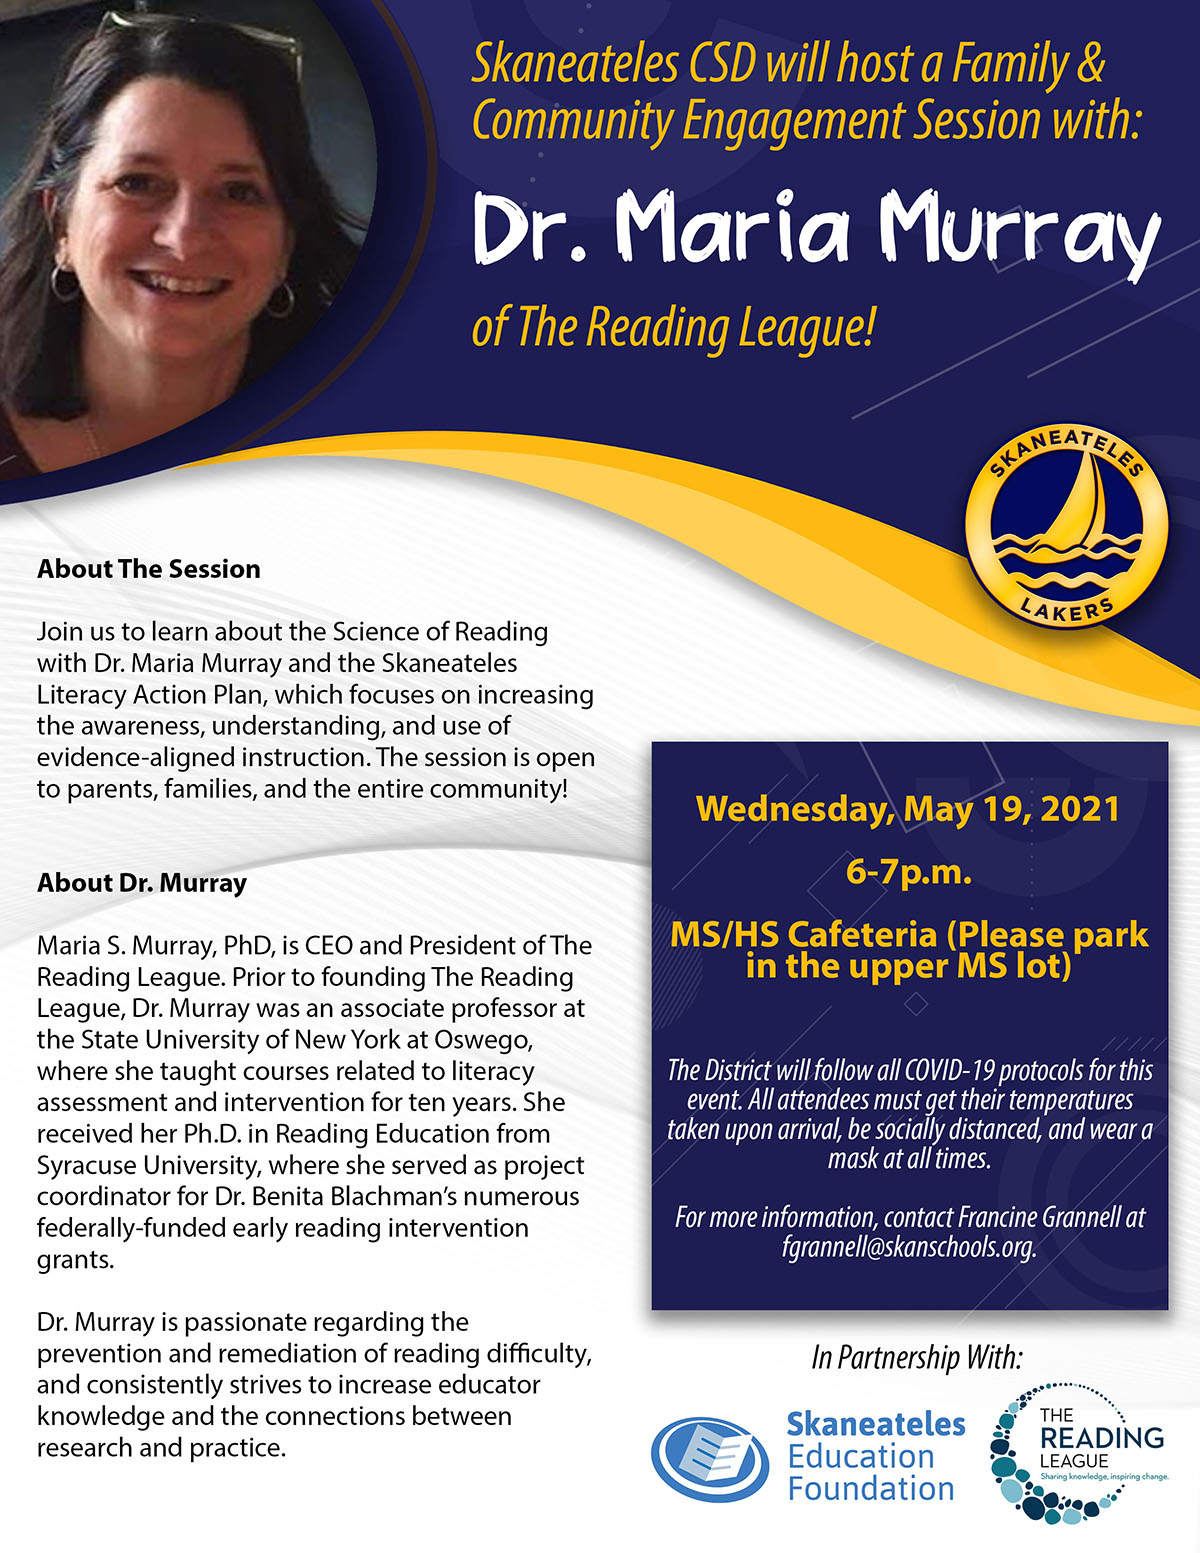 Skaneateles CSD is hosting a Family and Community Engagement Session With Dr. Maria Murray of The Reading League!